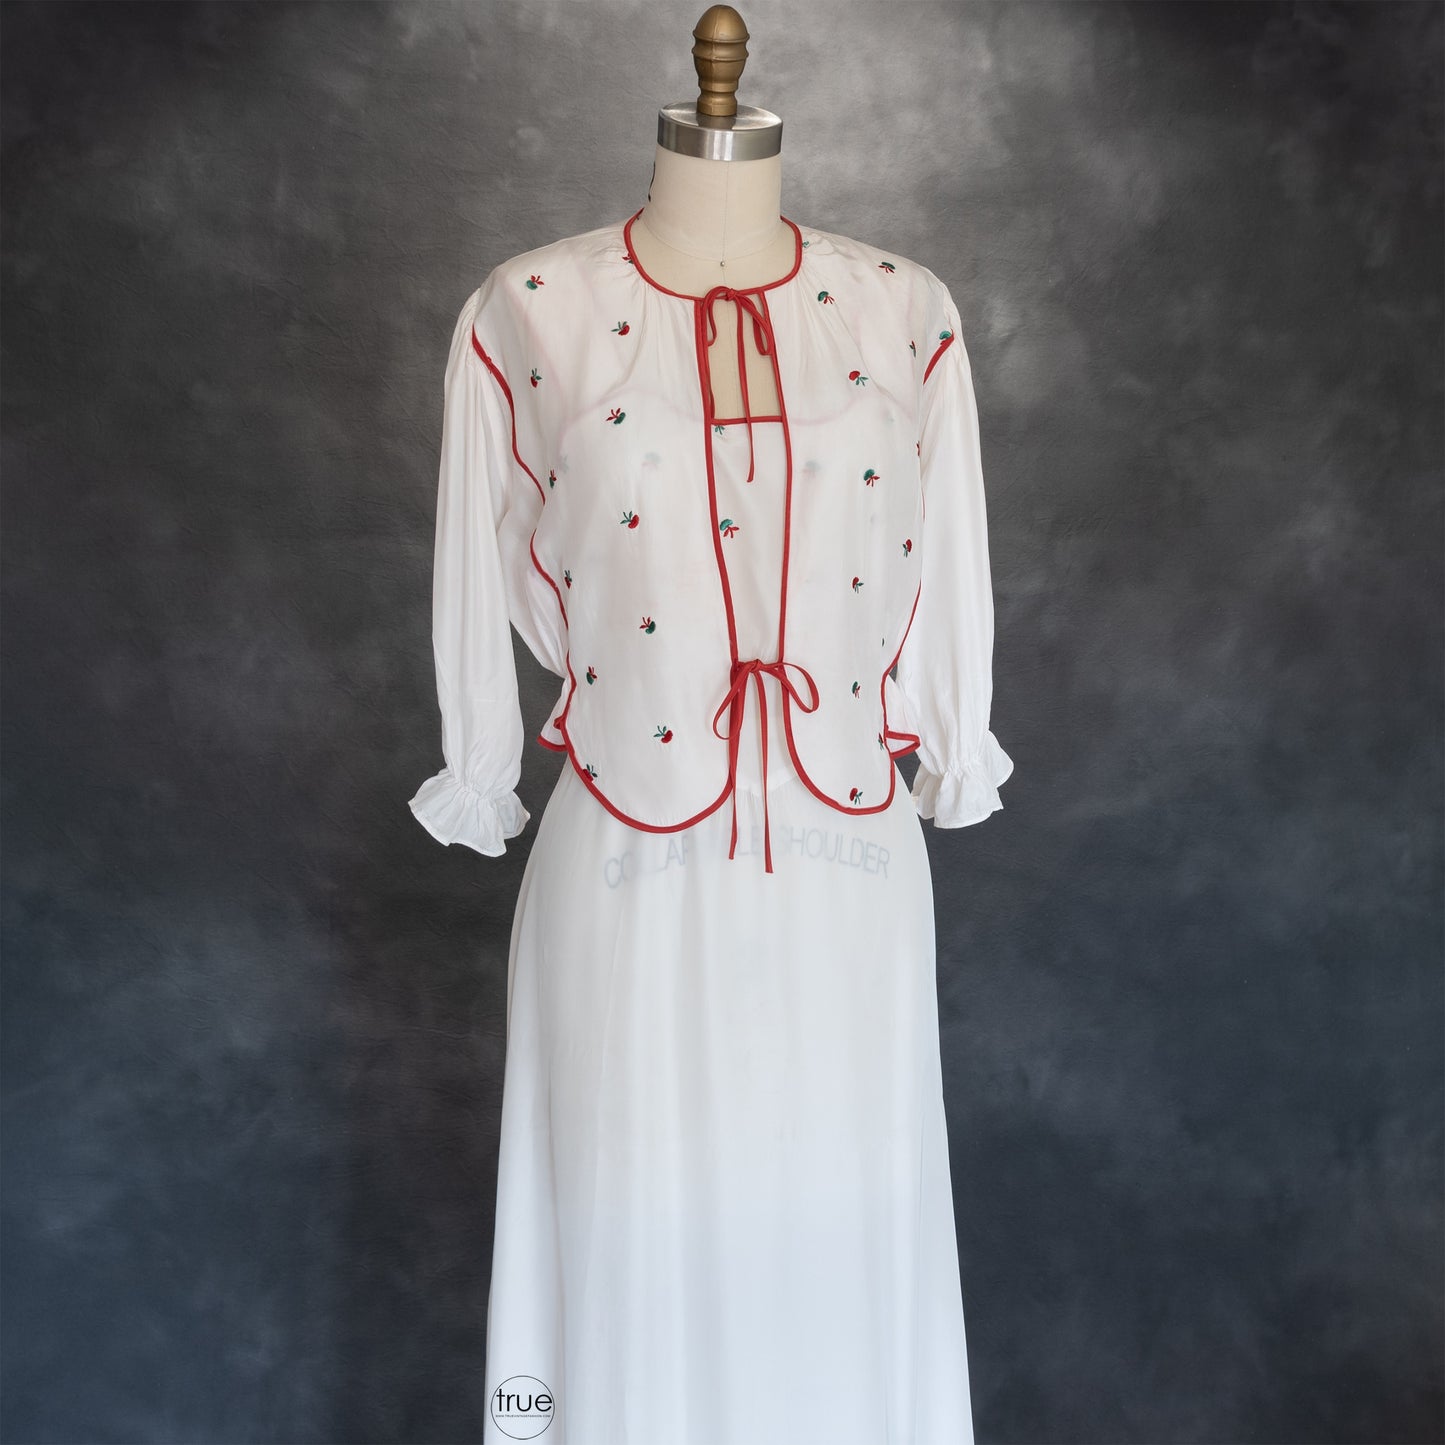 vintage 1940's nightgown ...embroidered MISS ELAINE white rayon nightie and bed jacket